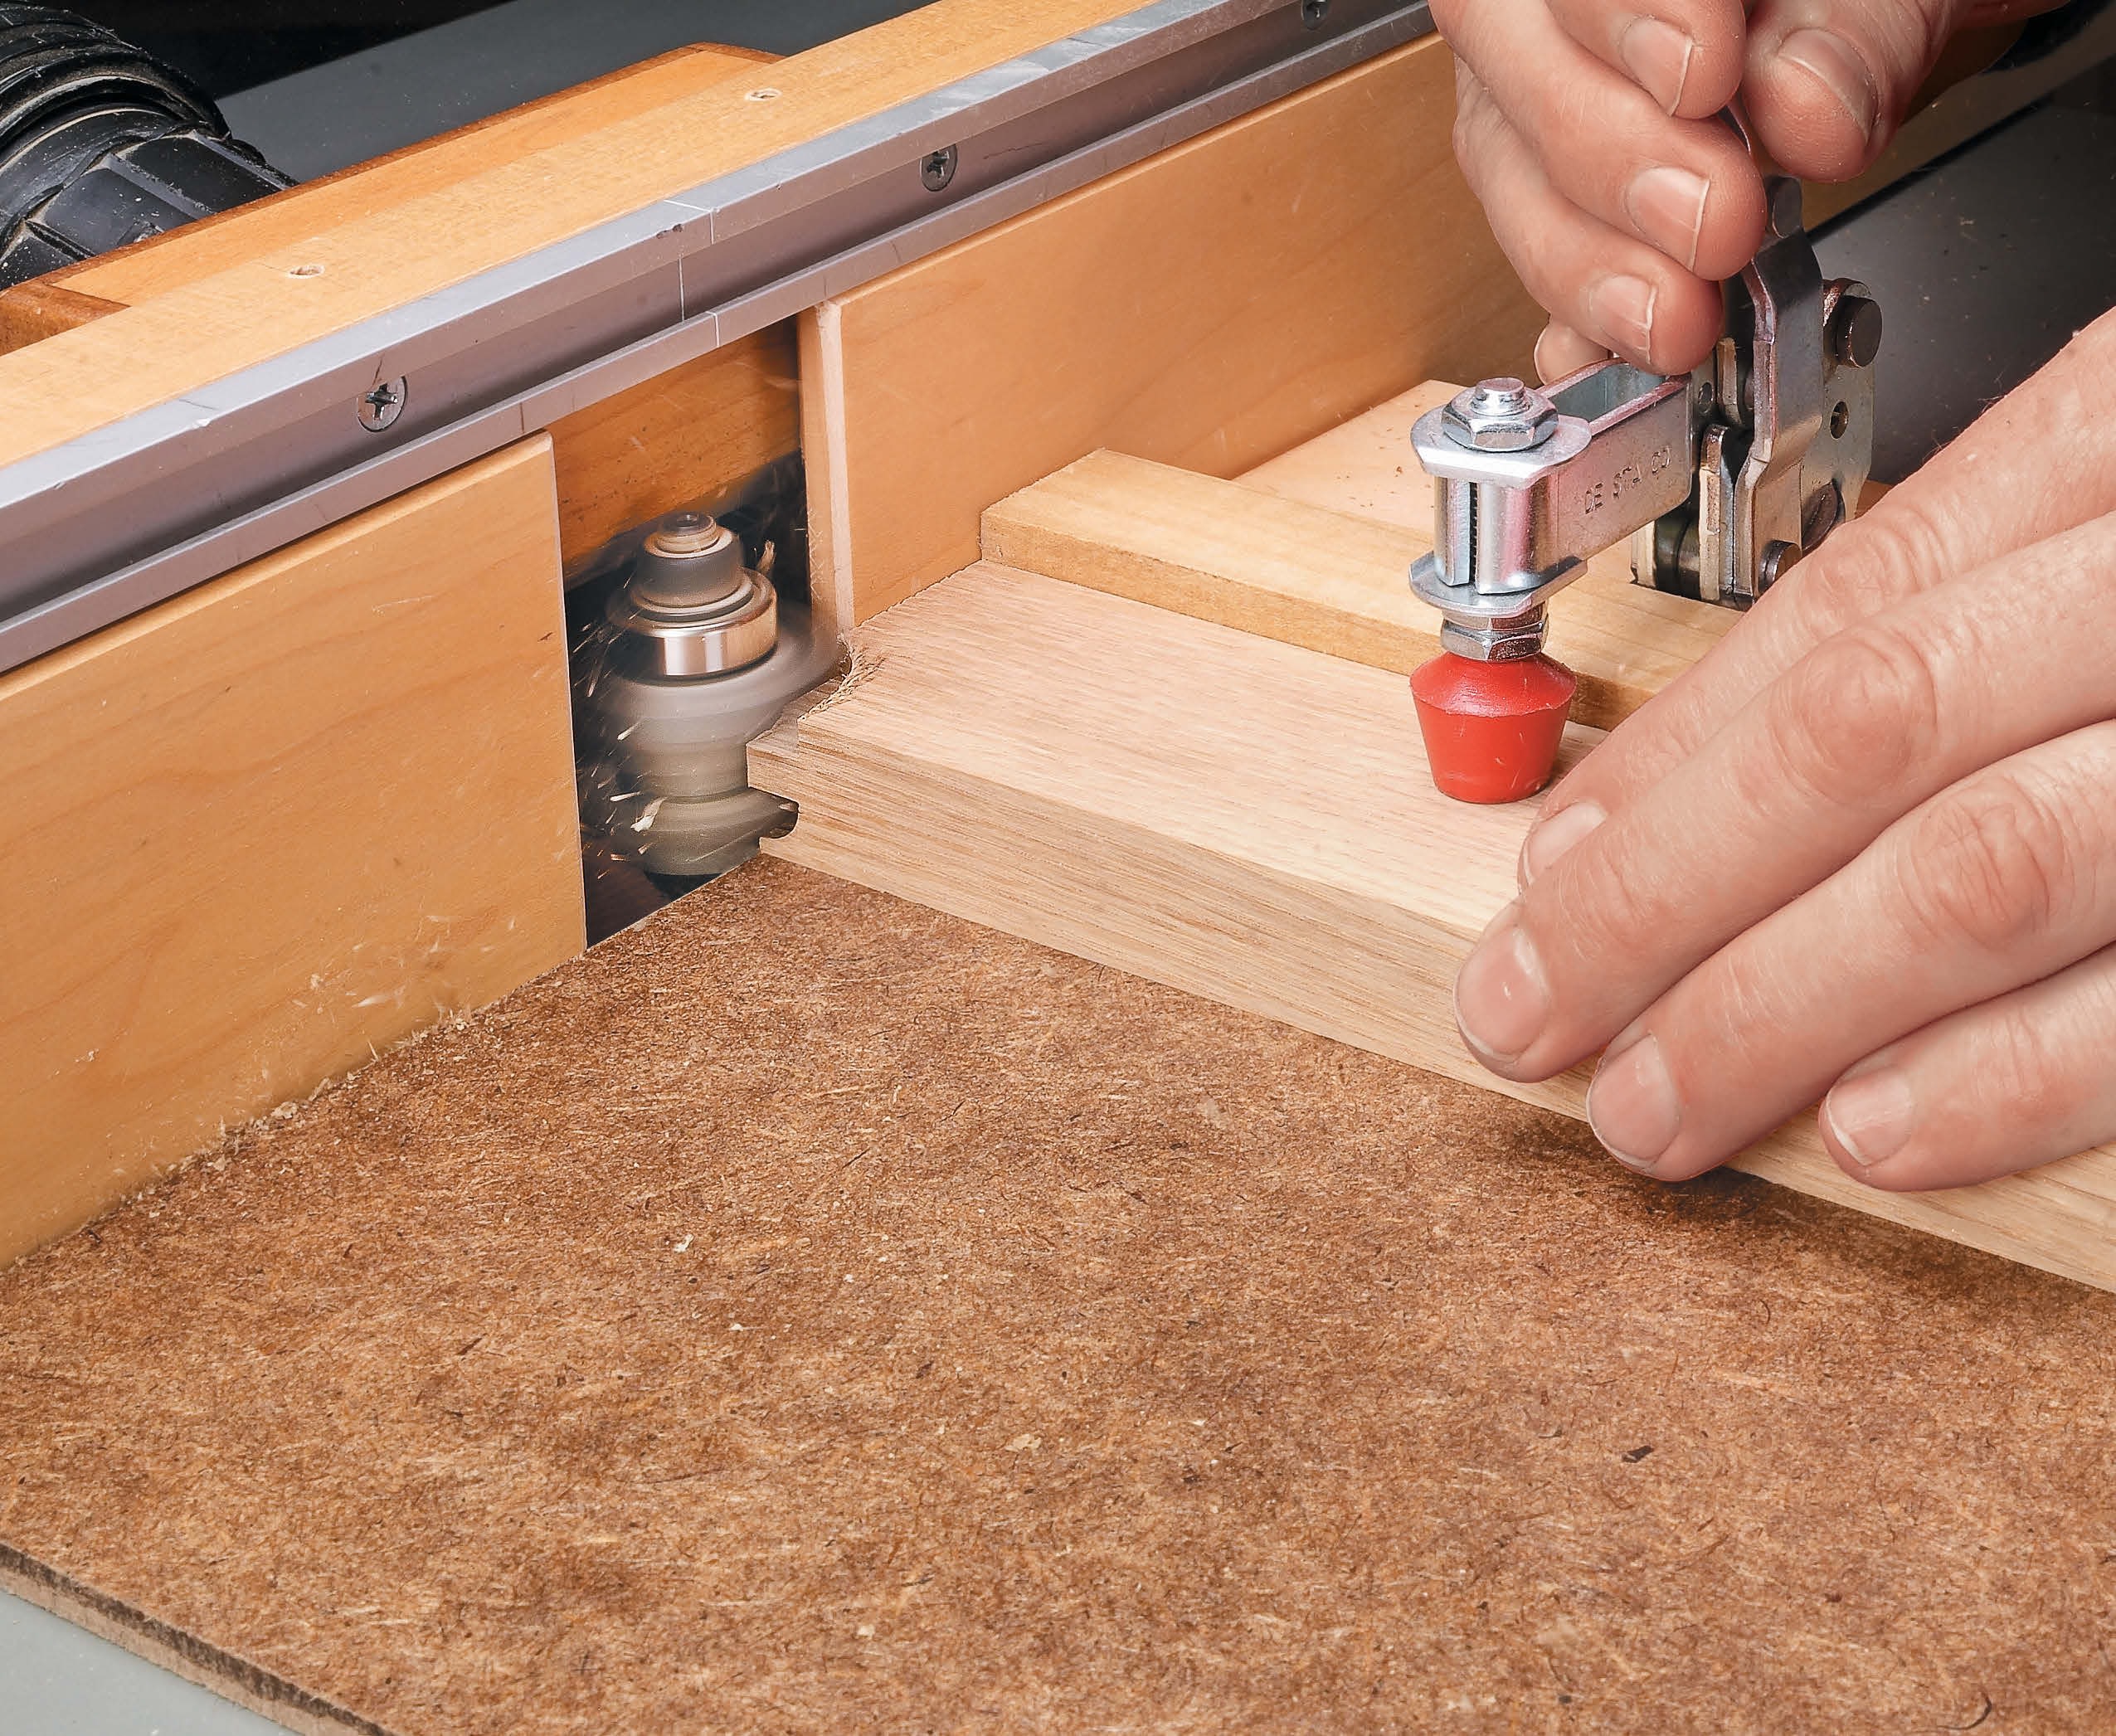 How to make square slot in wood lathe